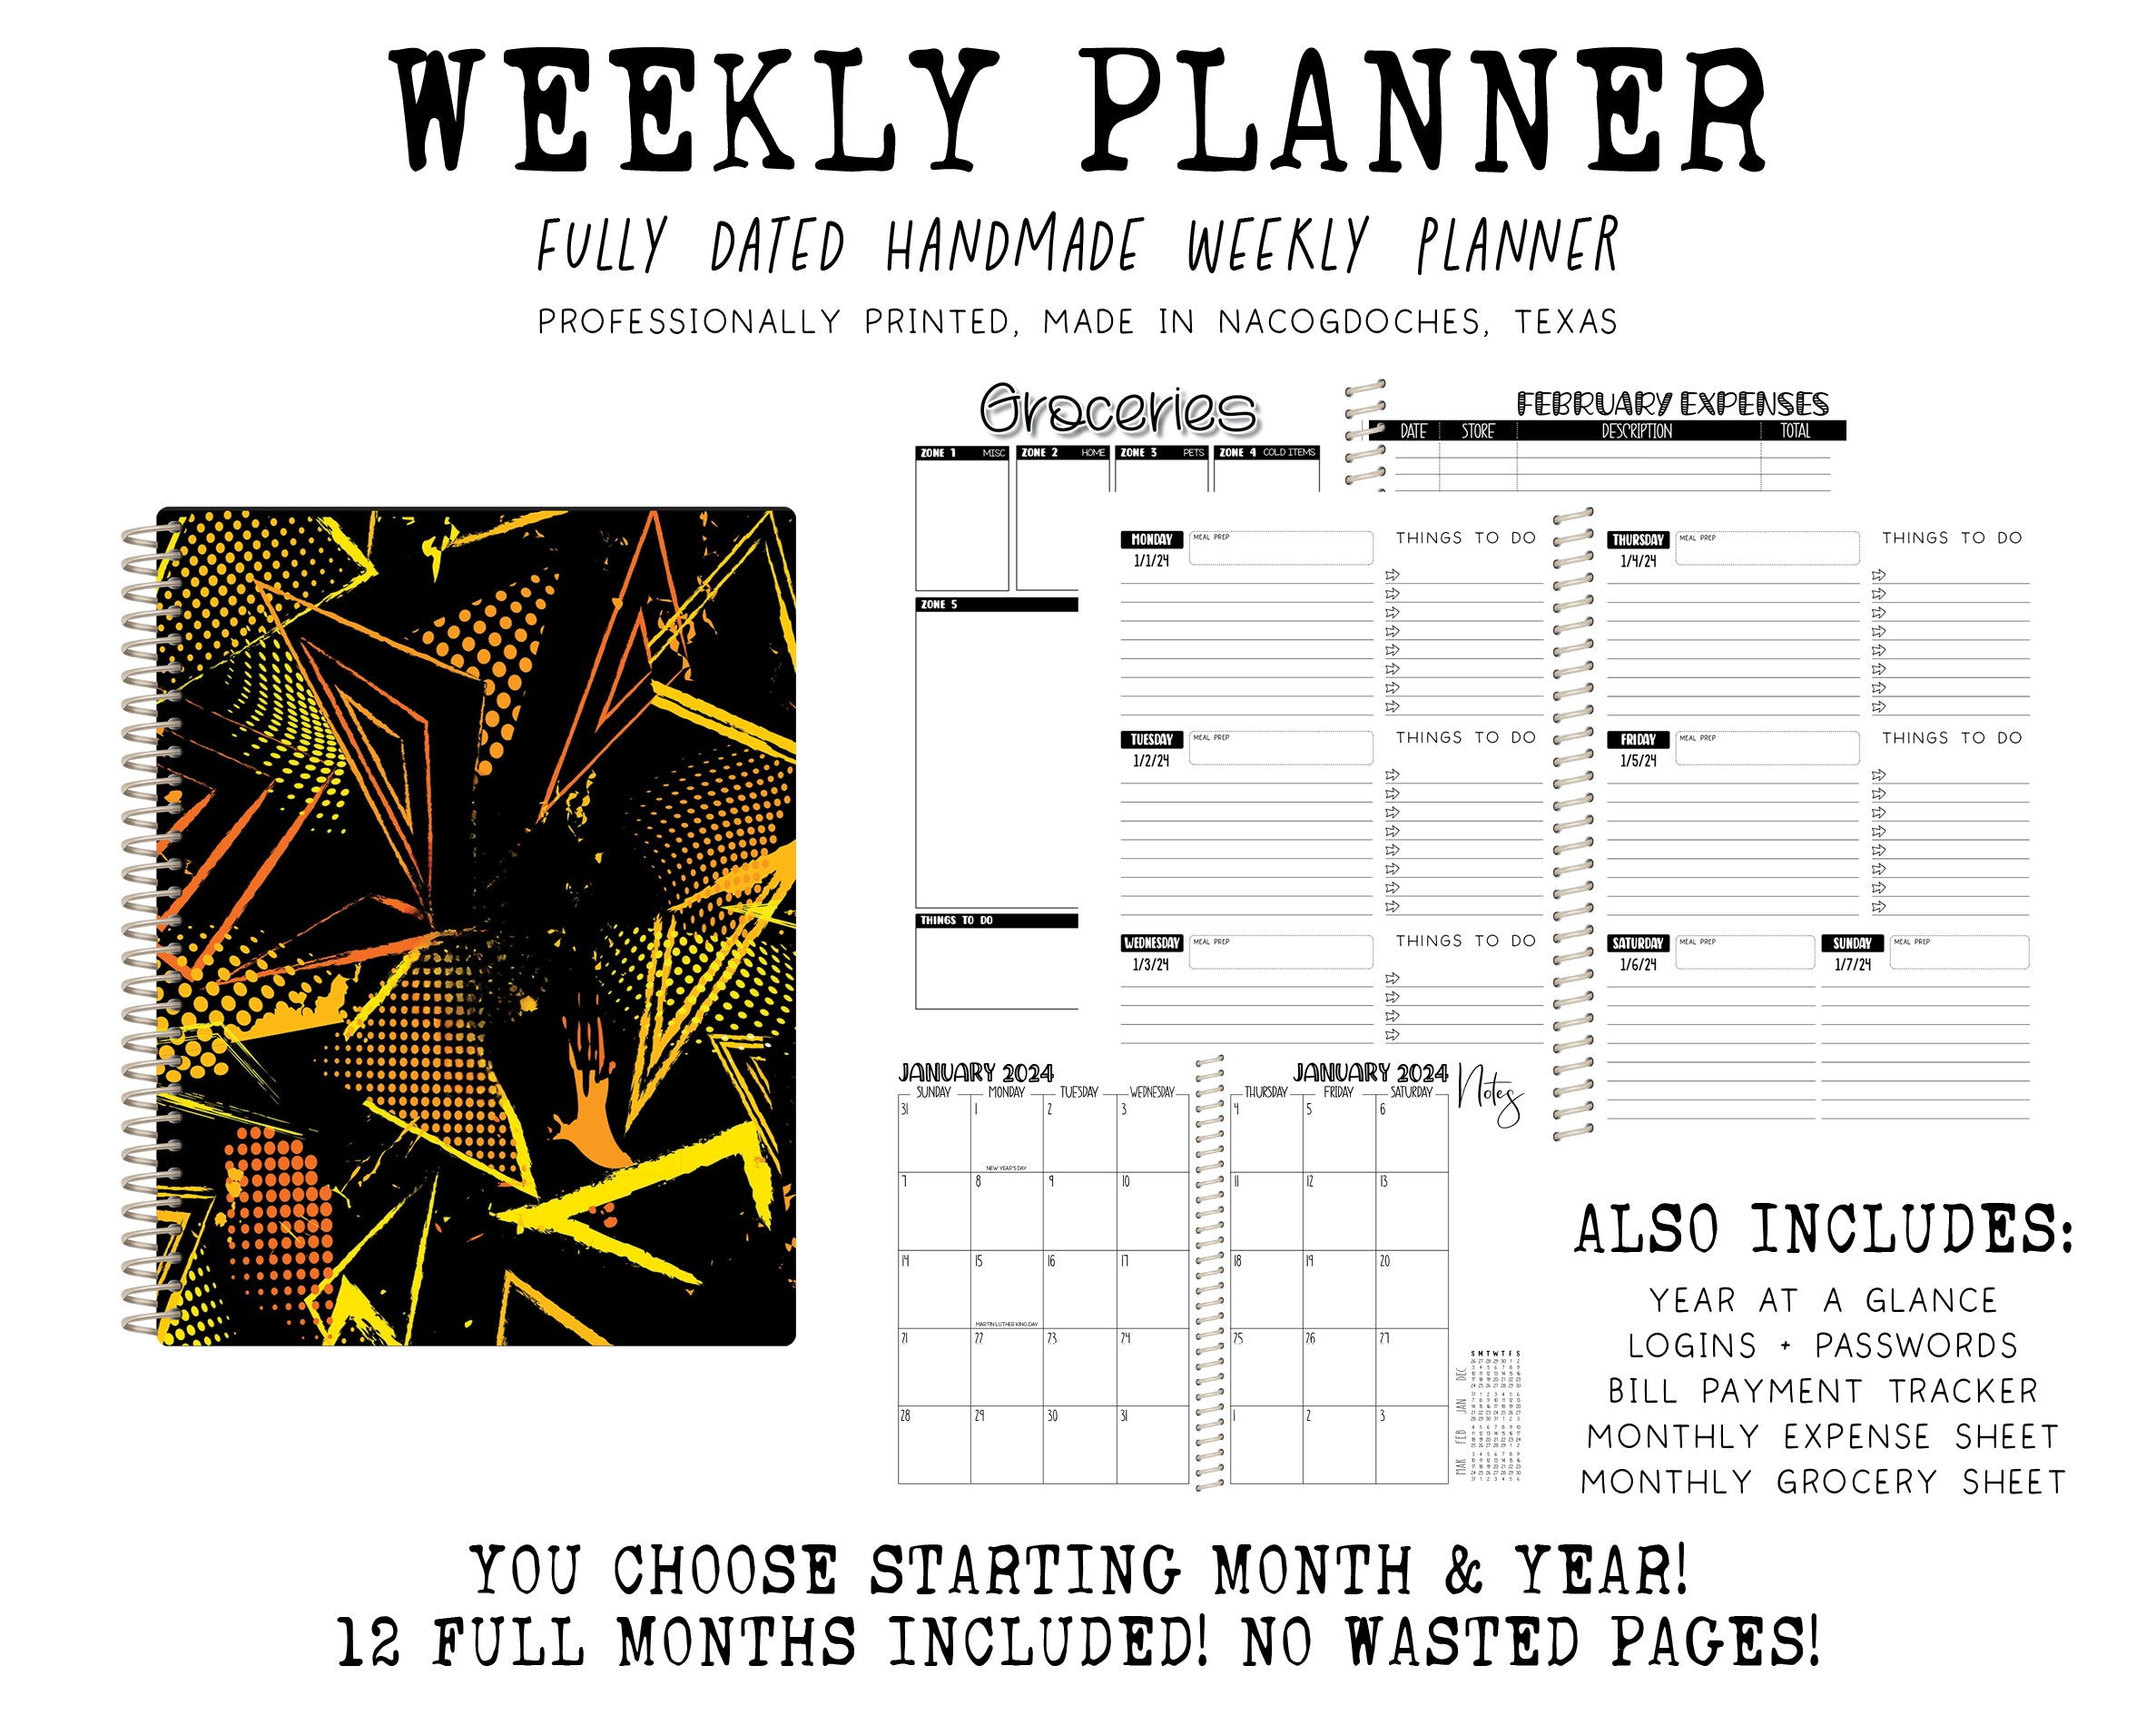 2024 Printed Weekly Planner - YELLOW GRUNGE ABSTRACT